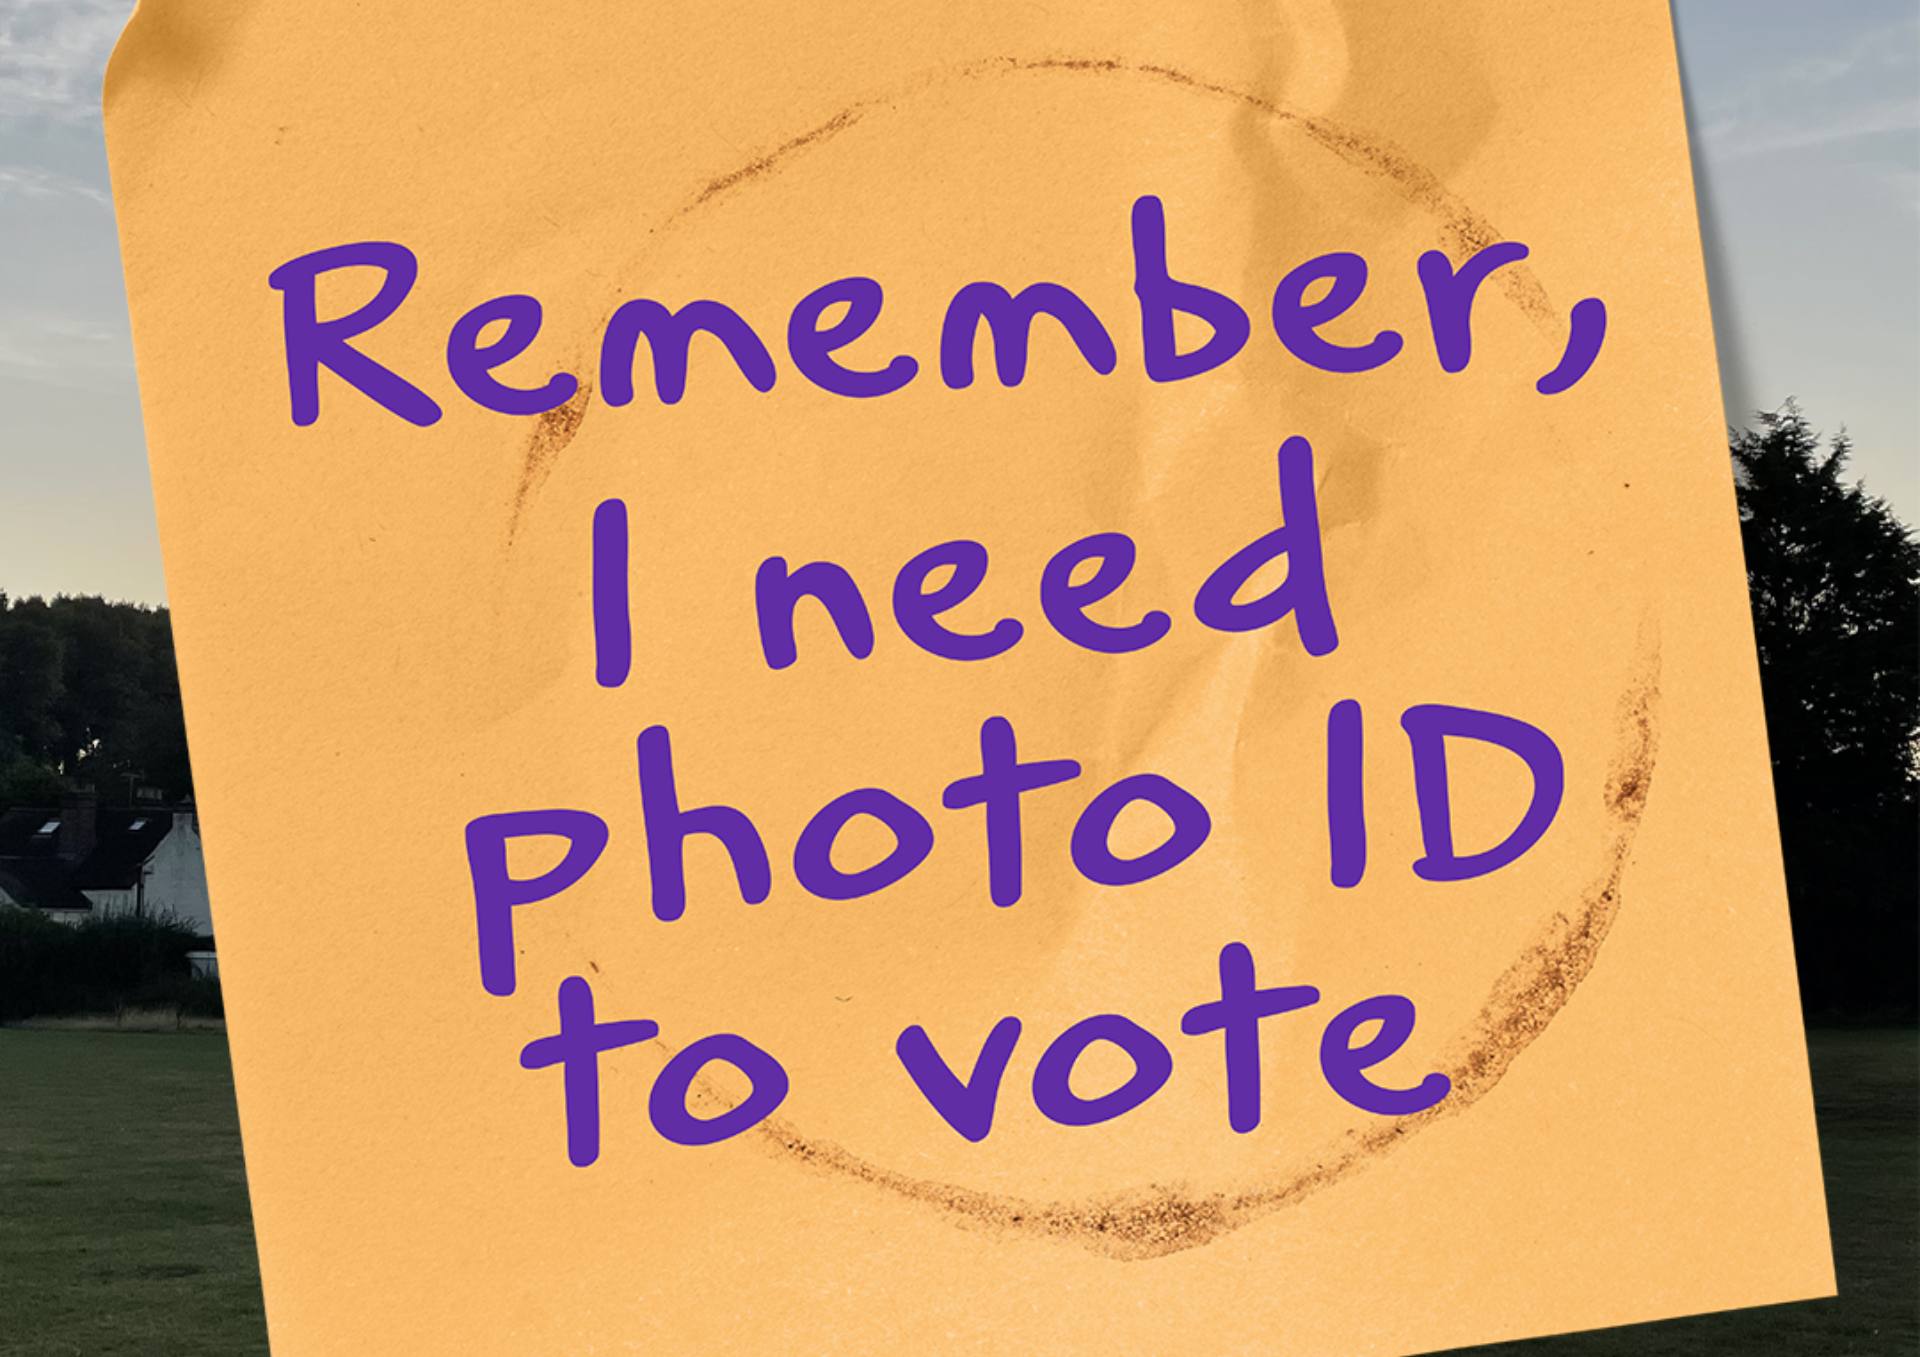 Post it note with writing saying: You now need photo ID to vote at a polling station